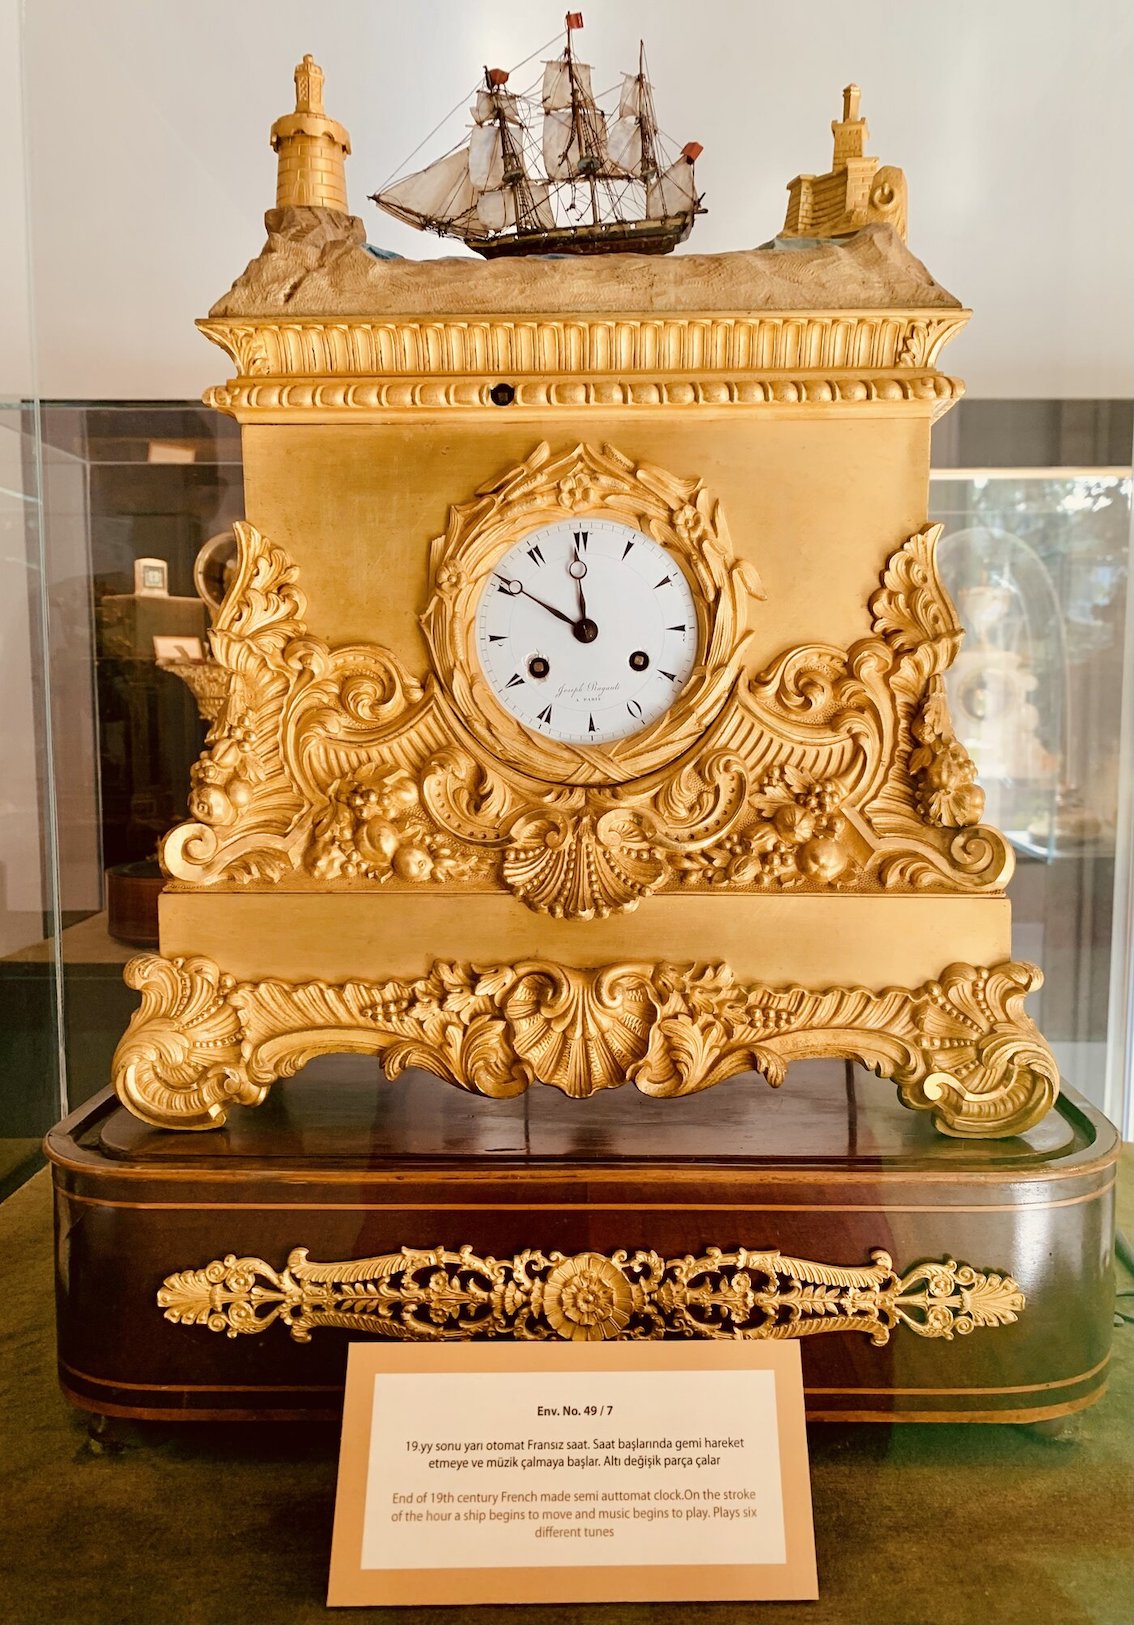 19th century French musical clock with moving ship